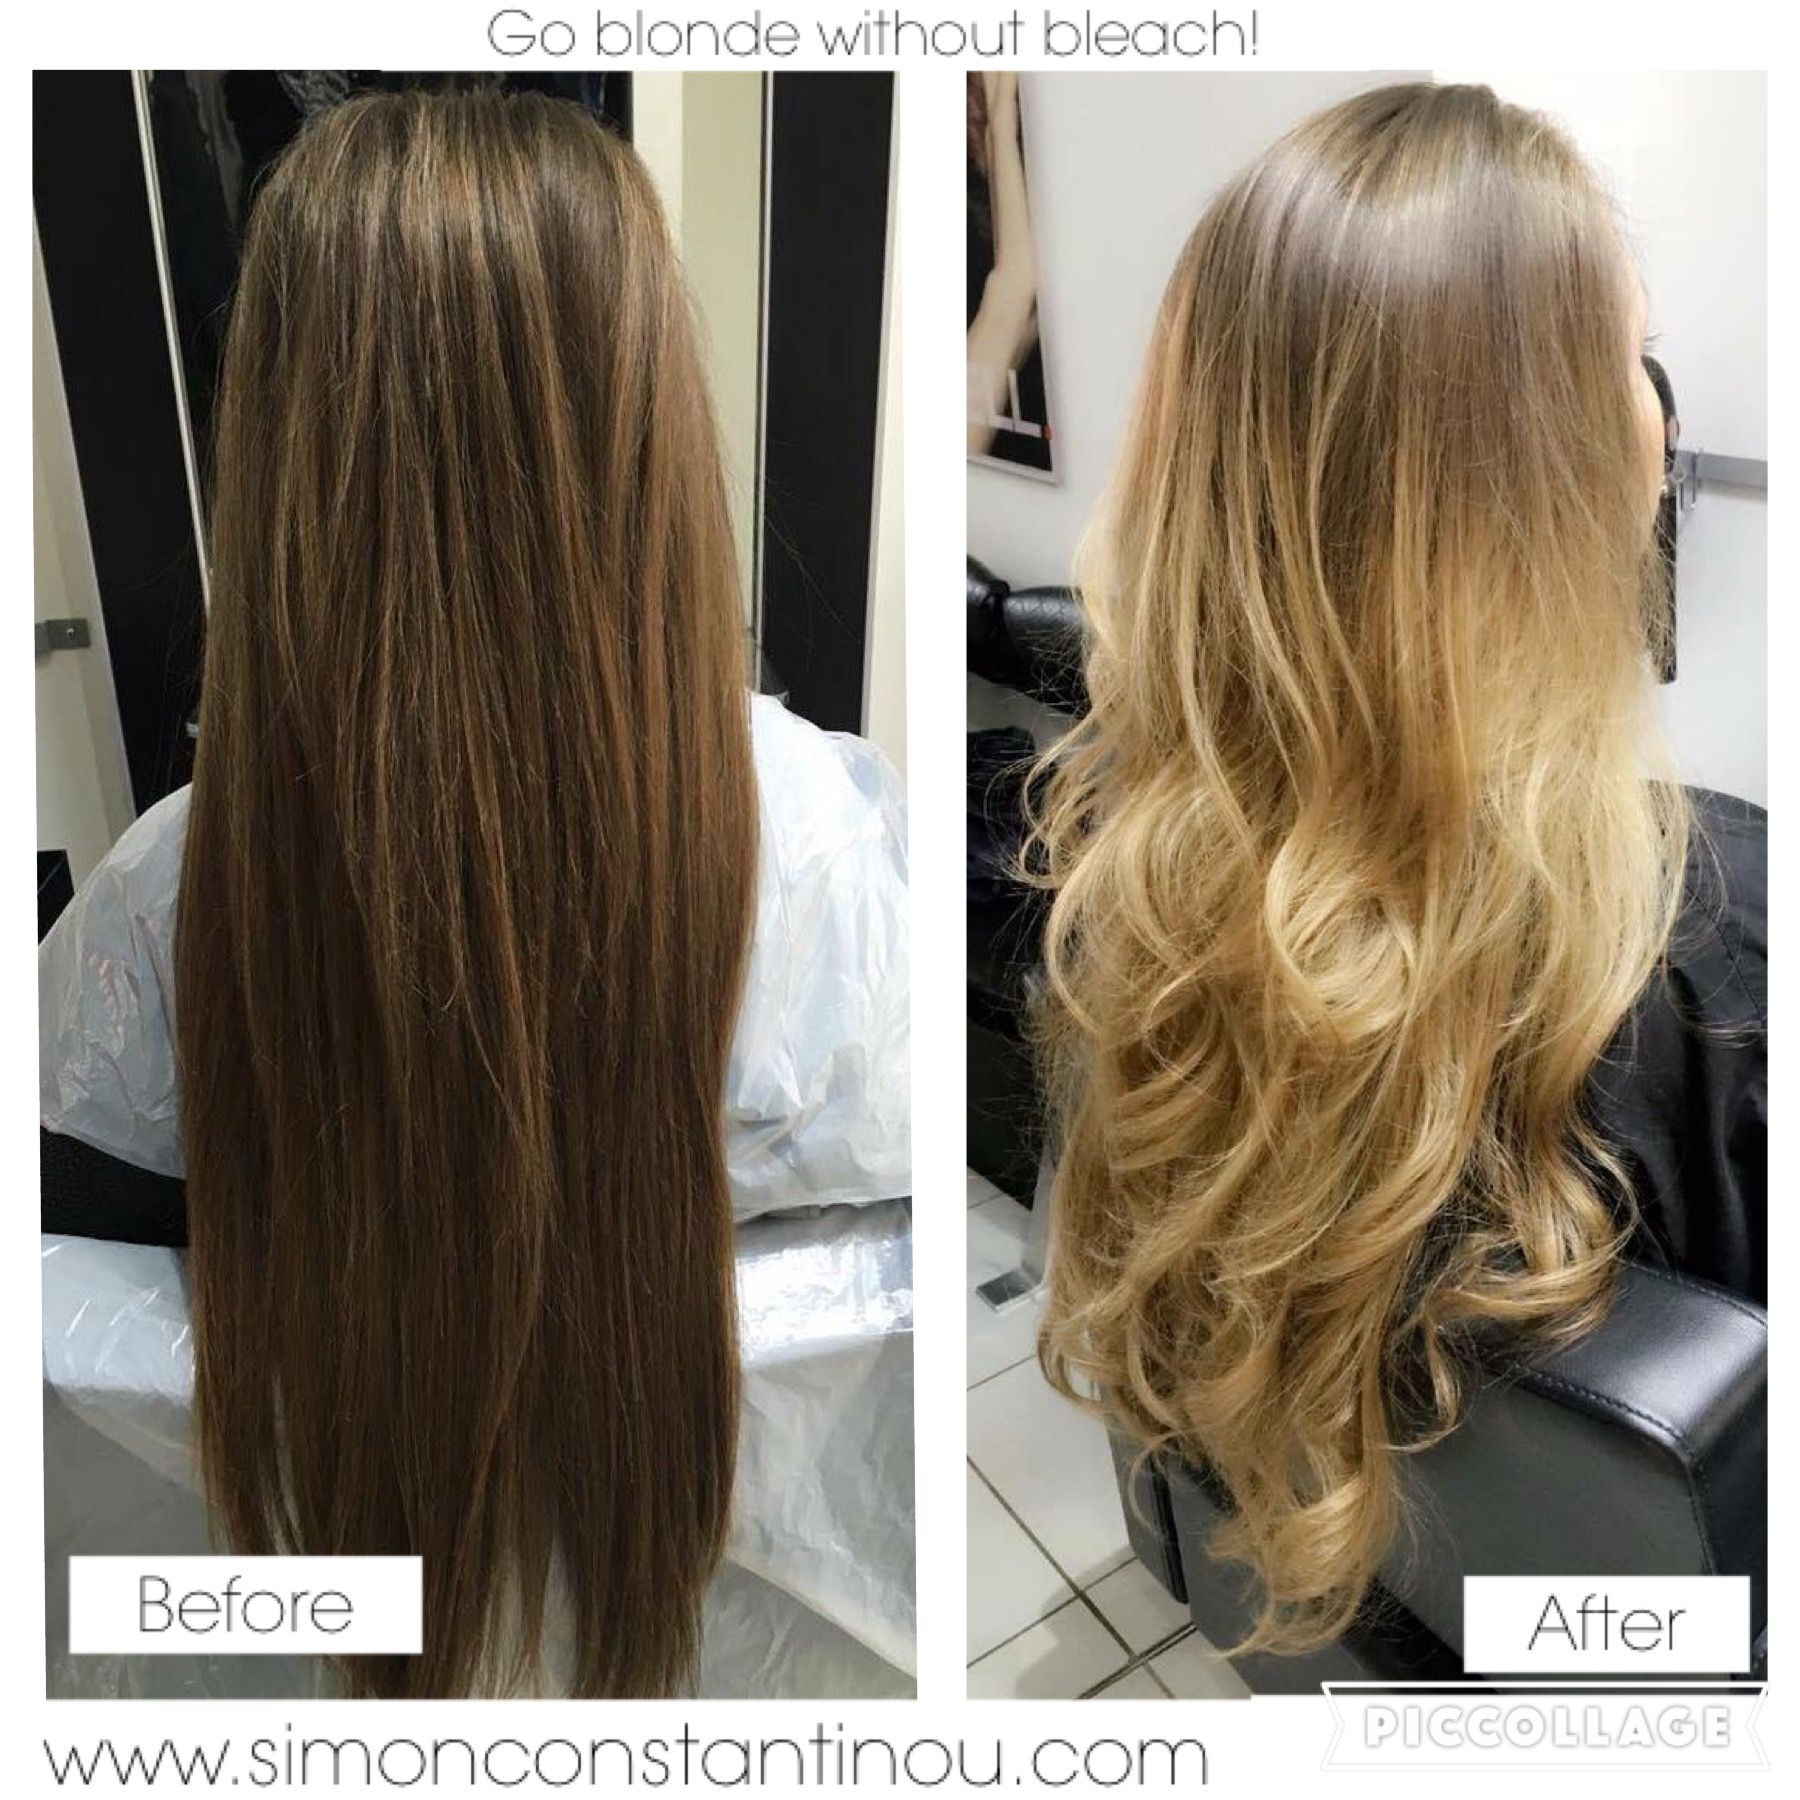 DIY Ombre Dark Hair Without Bleach
 Go lighter without bleach Ombré Balayage by Zobha Call